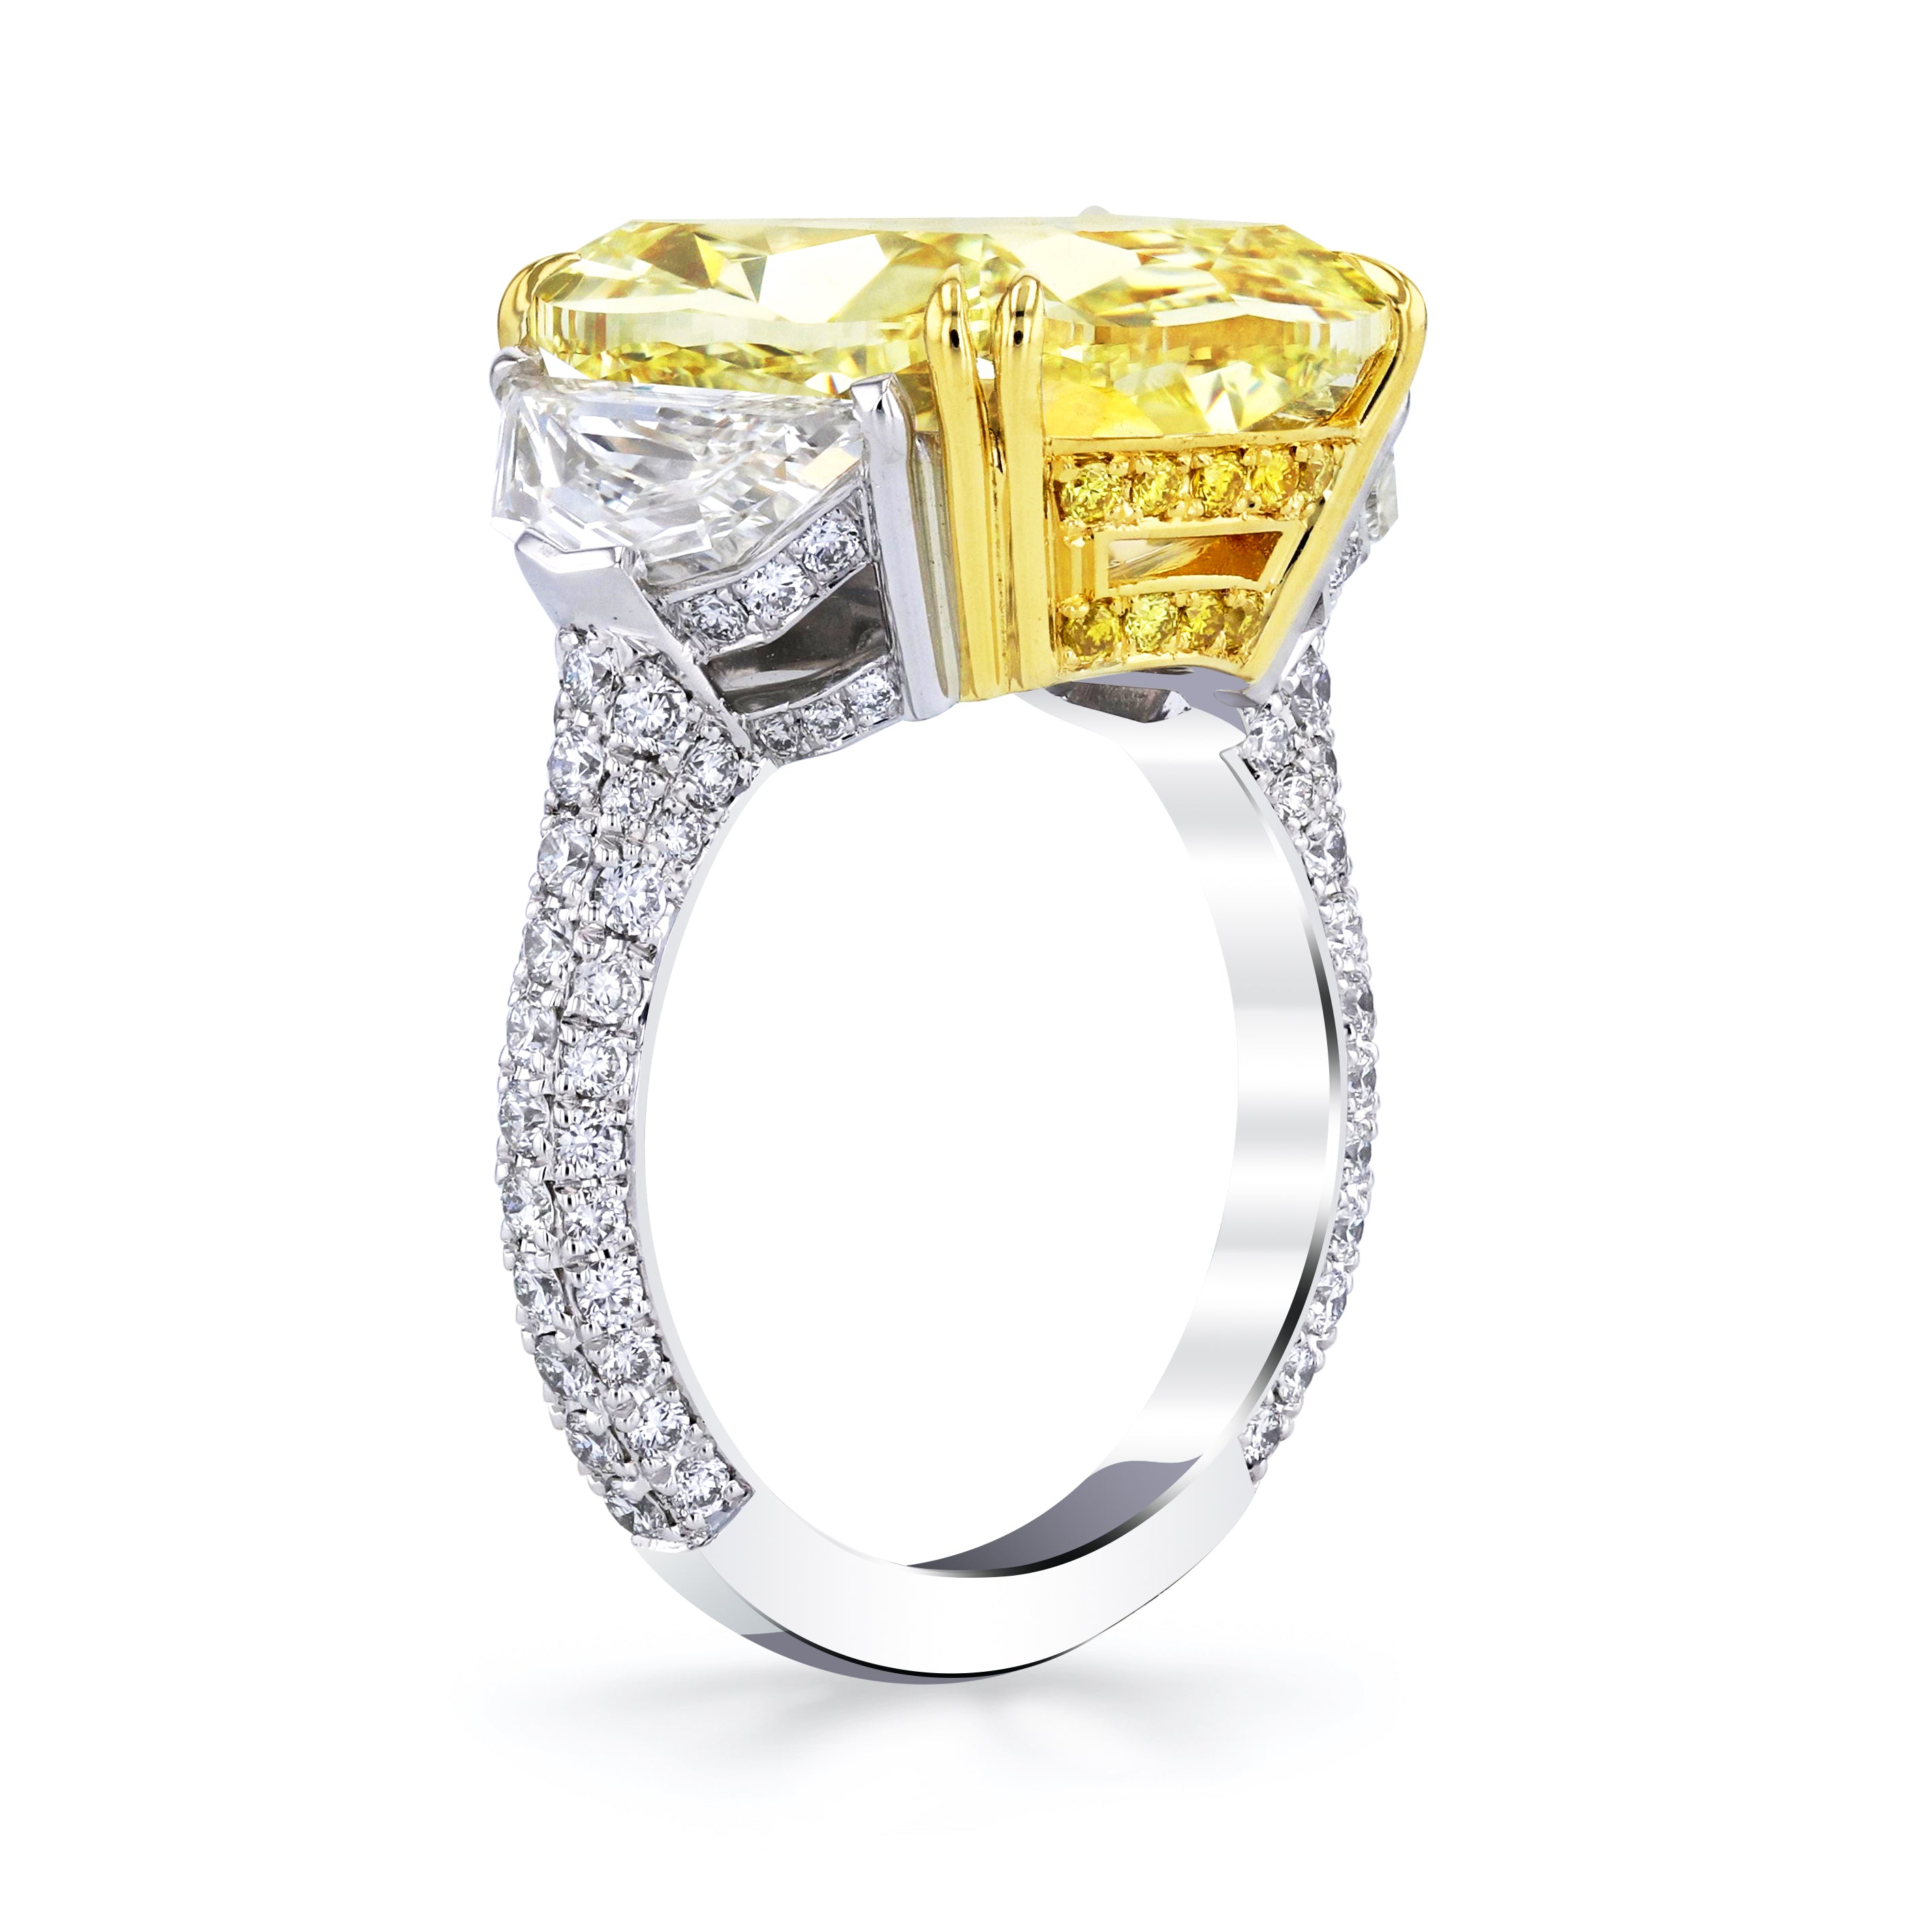 11.77ct Fancy Light Yellow Cushion Diamond Ring Rings Curated by H